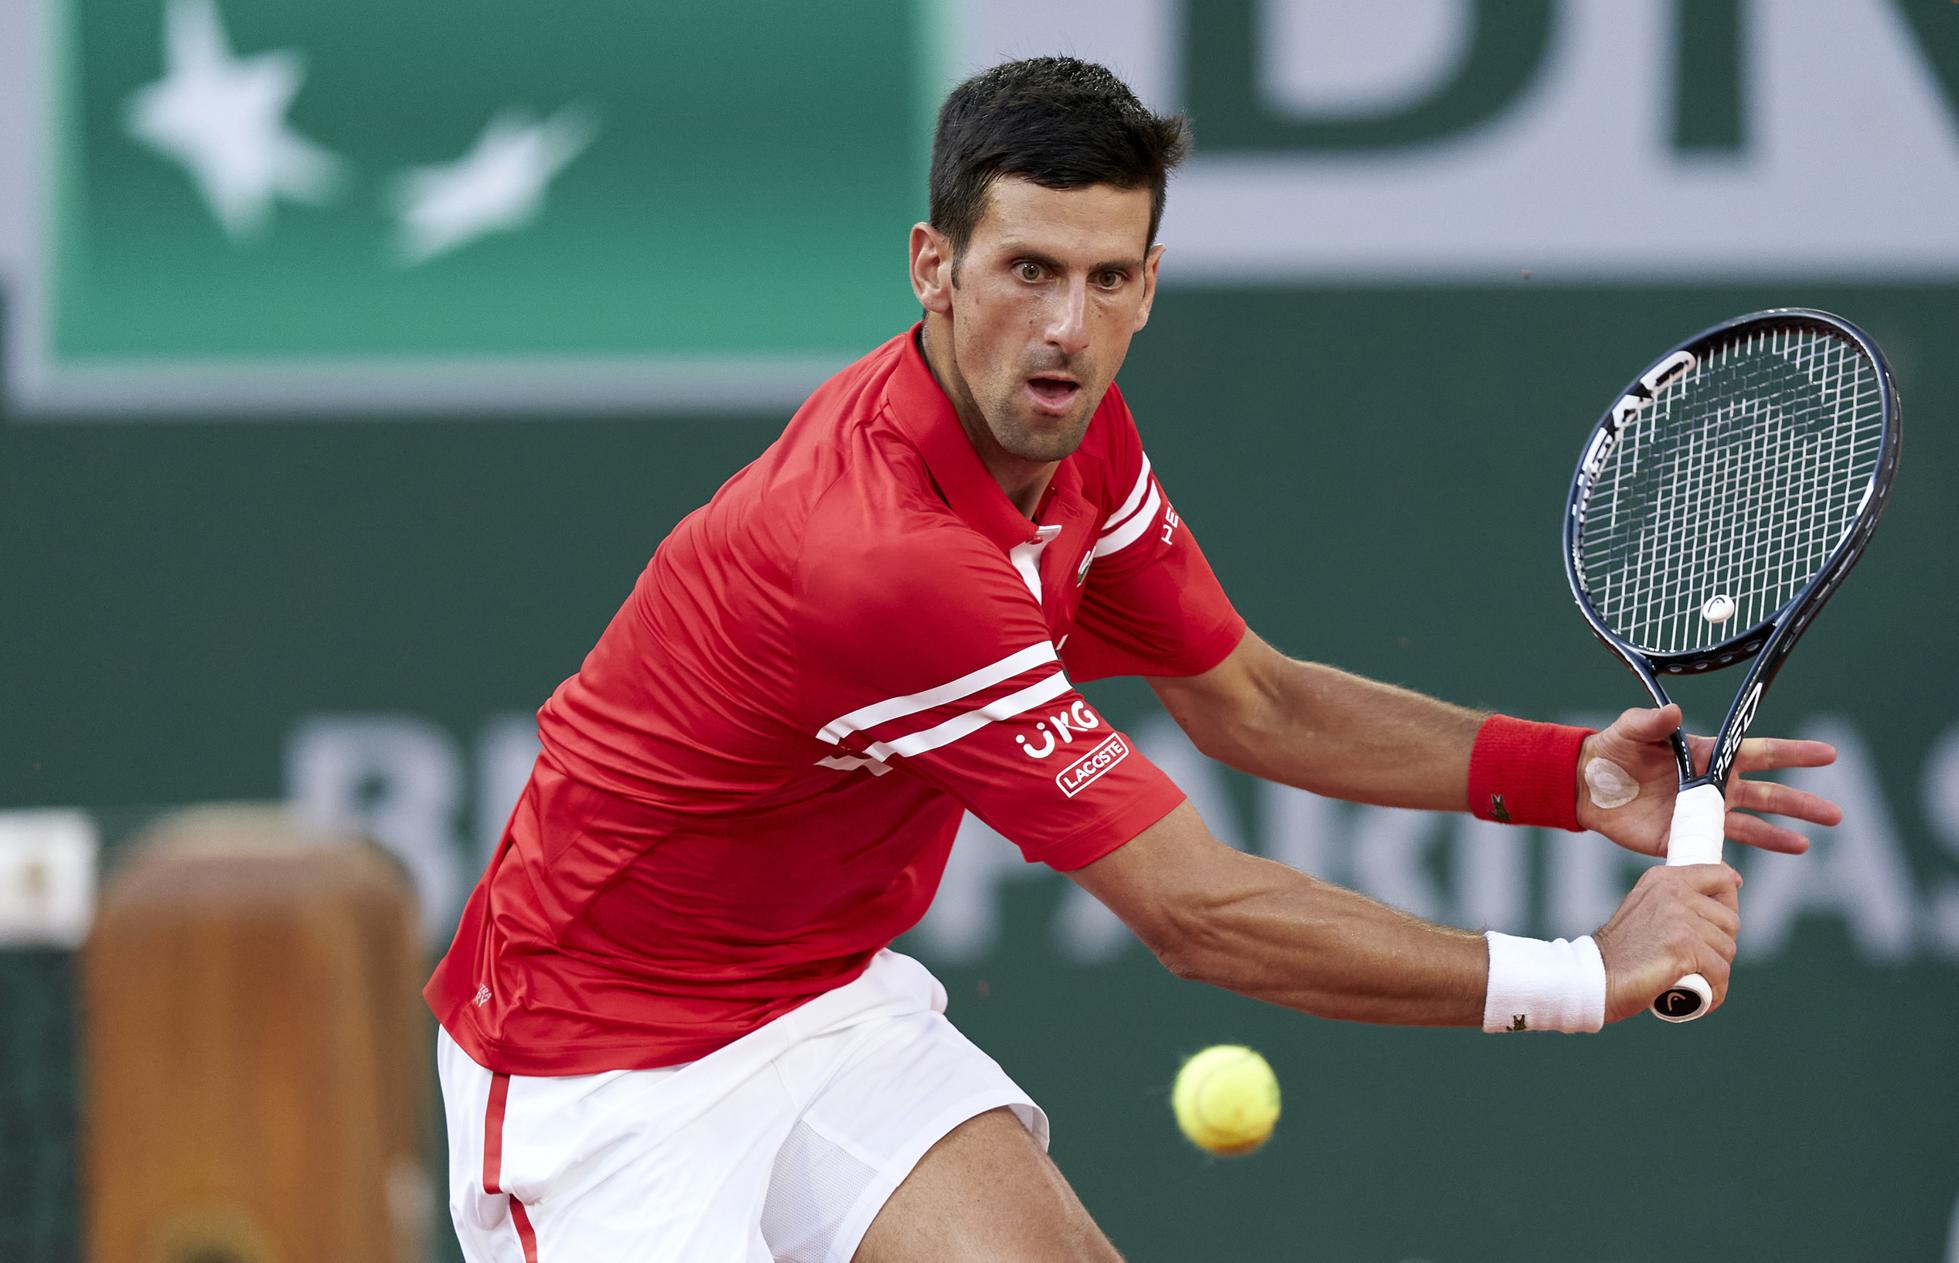 A New Tennis GOAT? How Novak Djokovic Stacks Up Against Nadal And Federer After French Open Classic